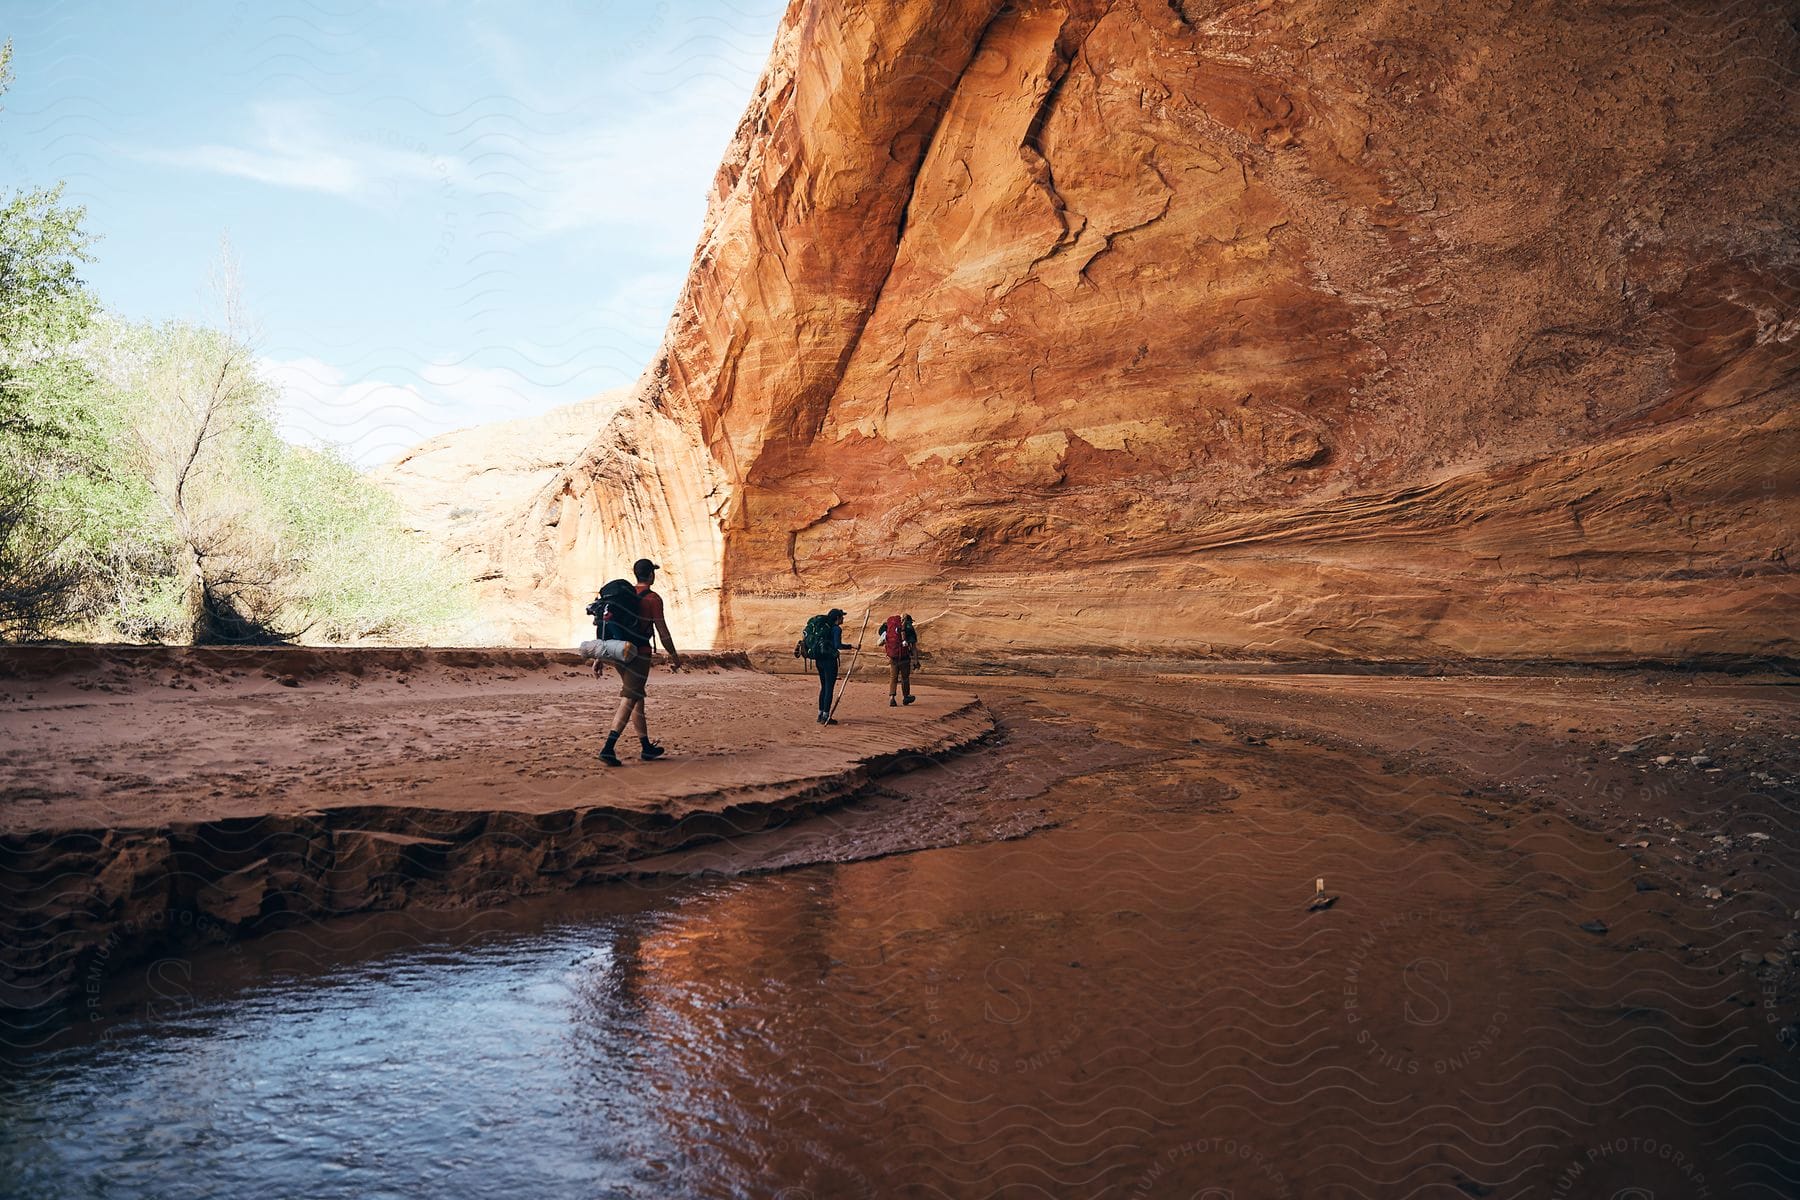 Three people walk beside a stream in a rocky gorge in the sunlight.